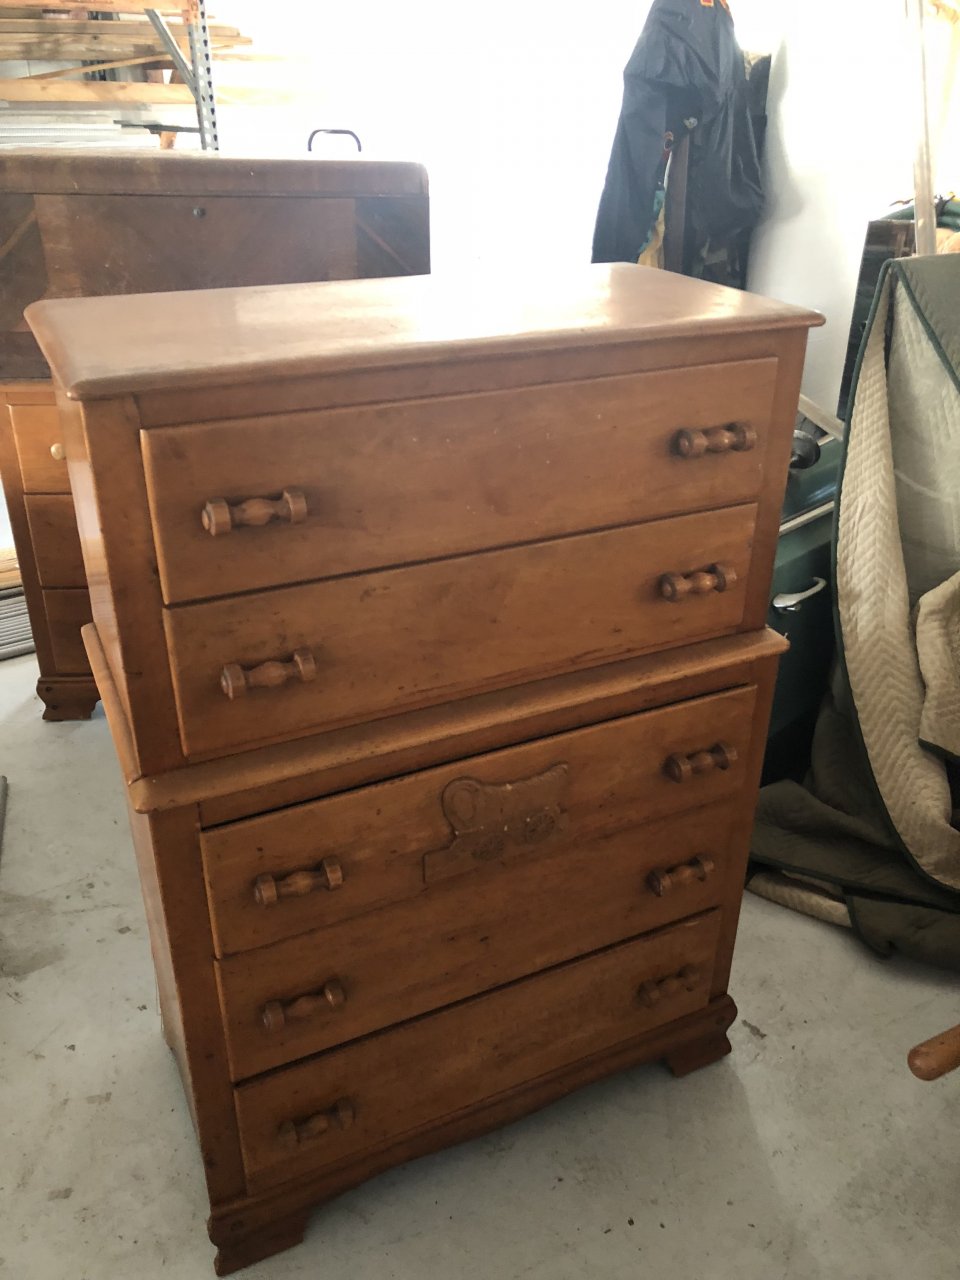 Virginia House Furniture Value | My Antique Furniture Collection